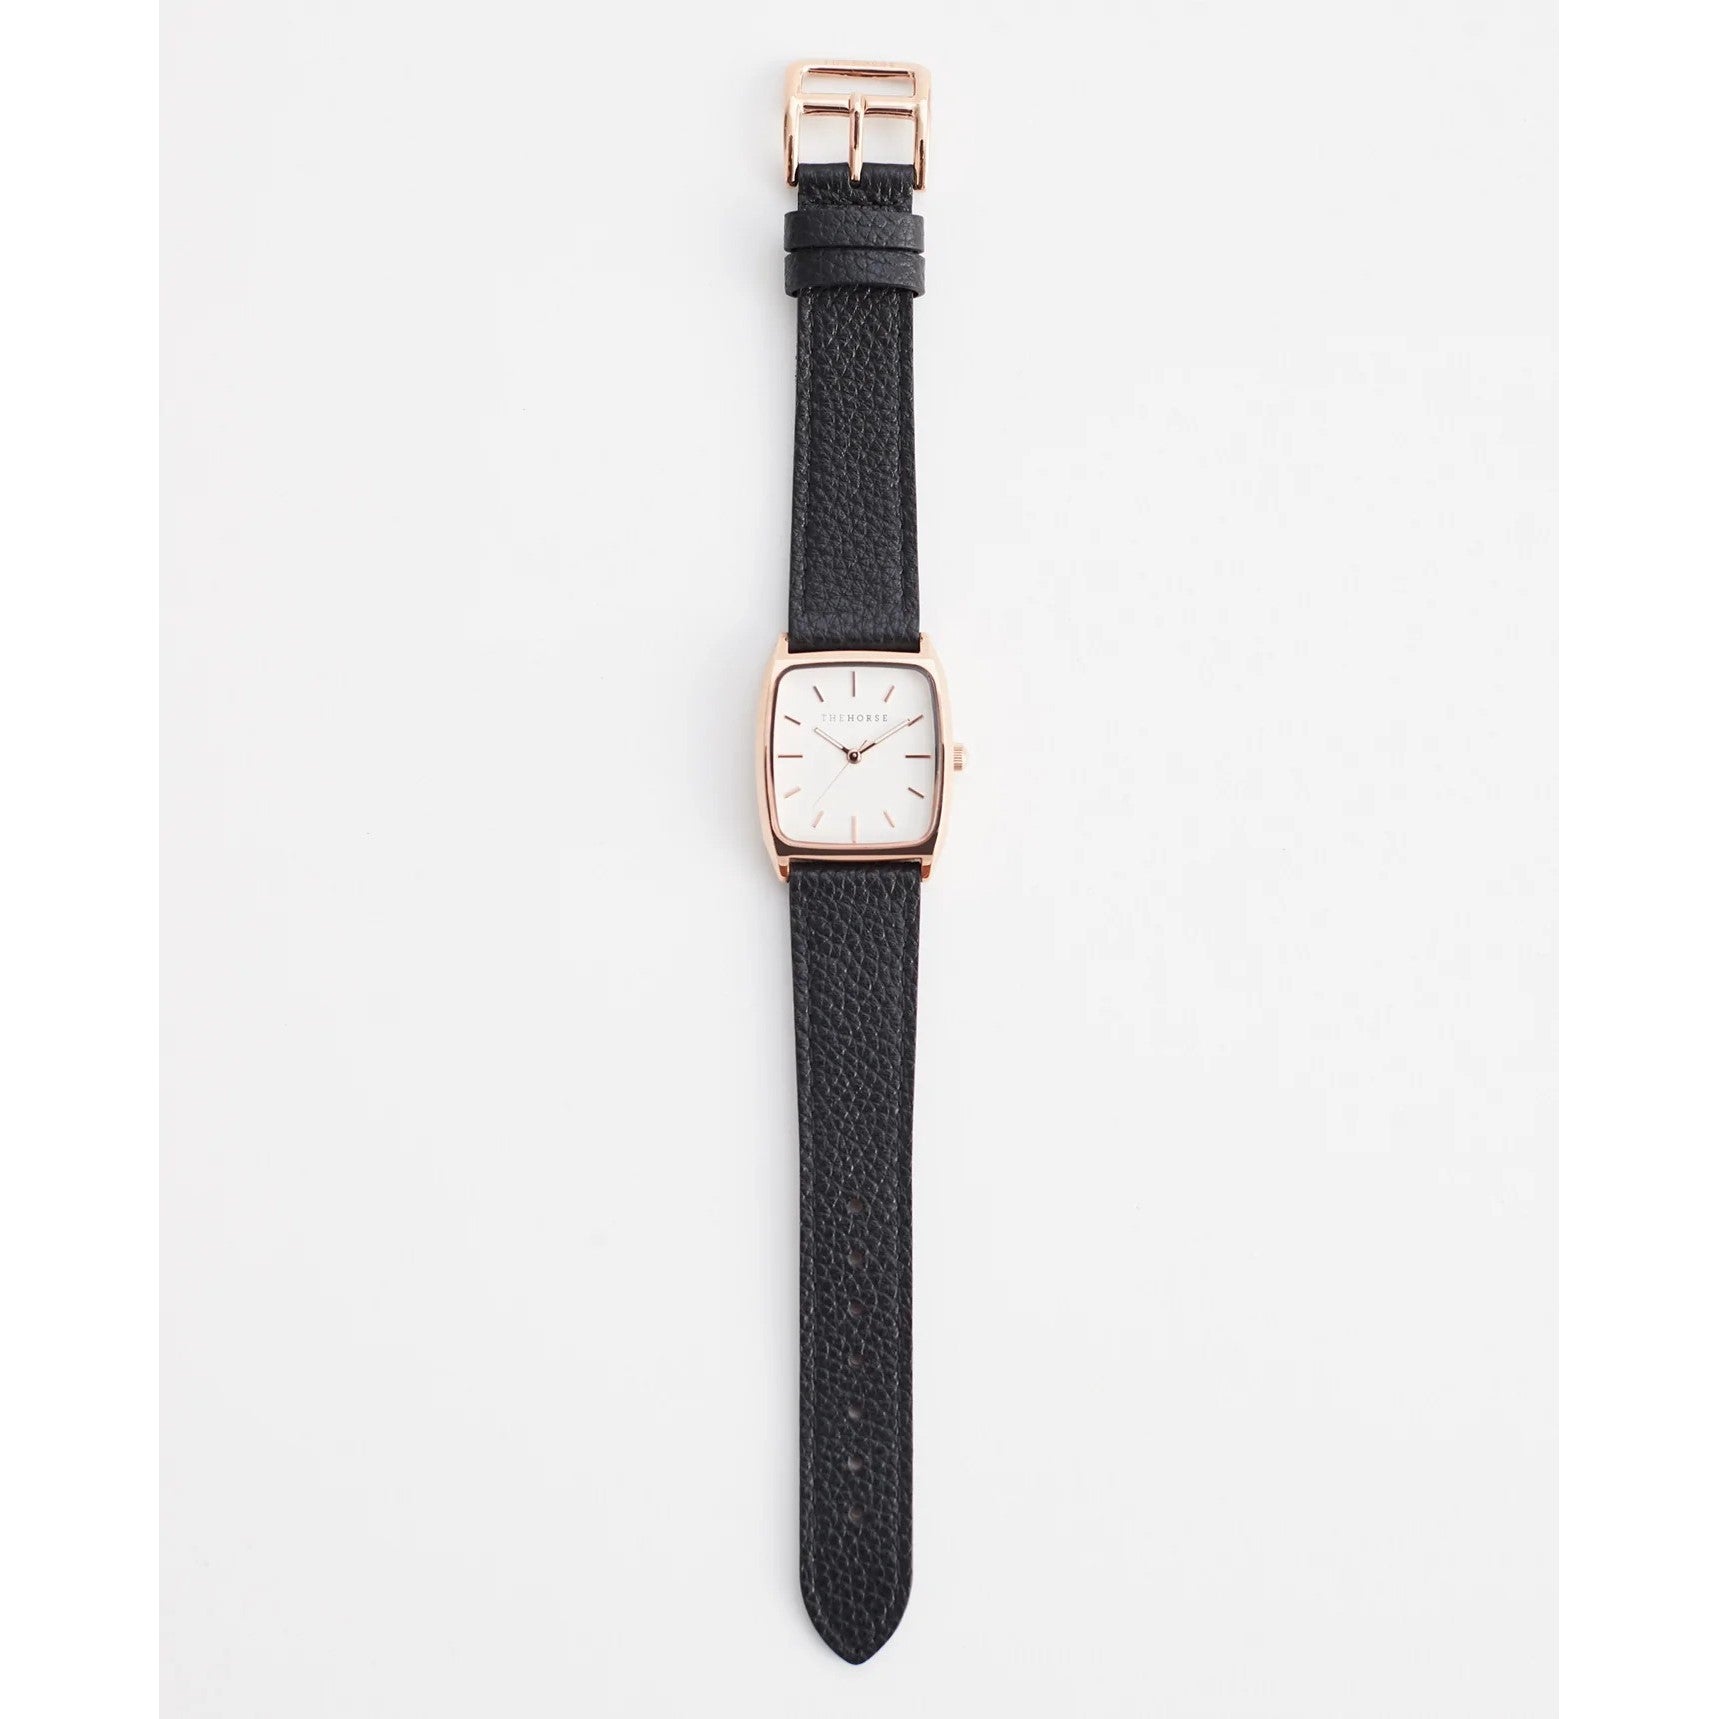 The Horse Black Rose Gold White Dial Dress Watch